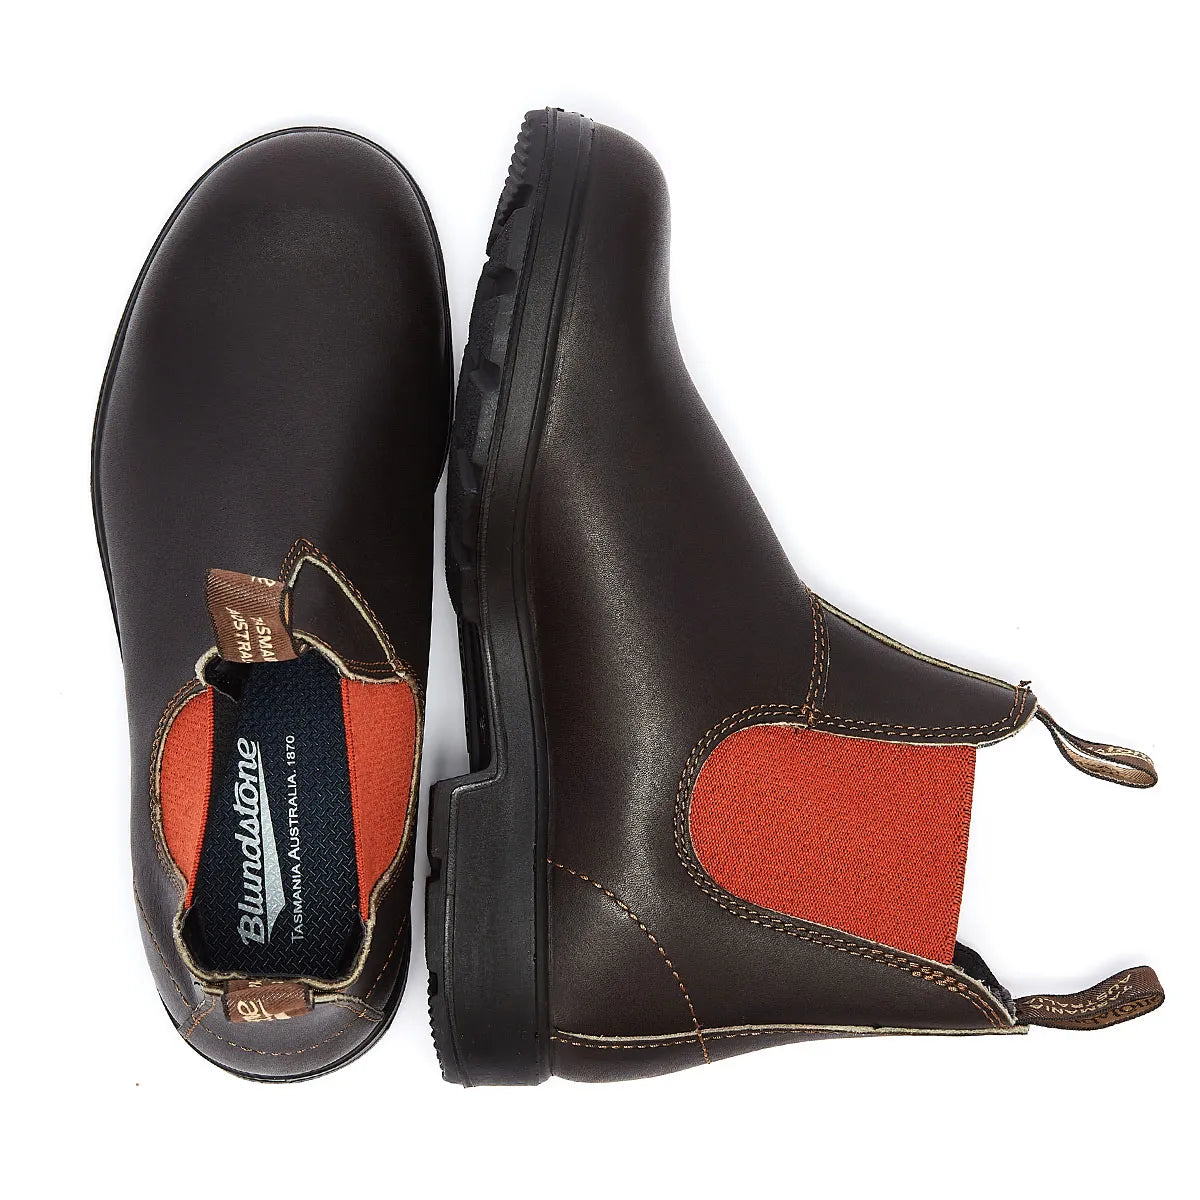 Top and side view Blundstone 1918 Brown/Terracotta Chelsea Boots  